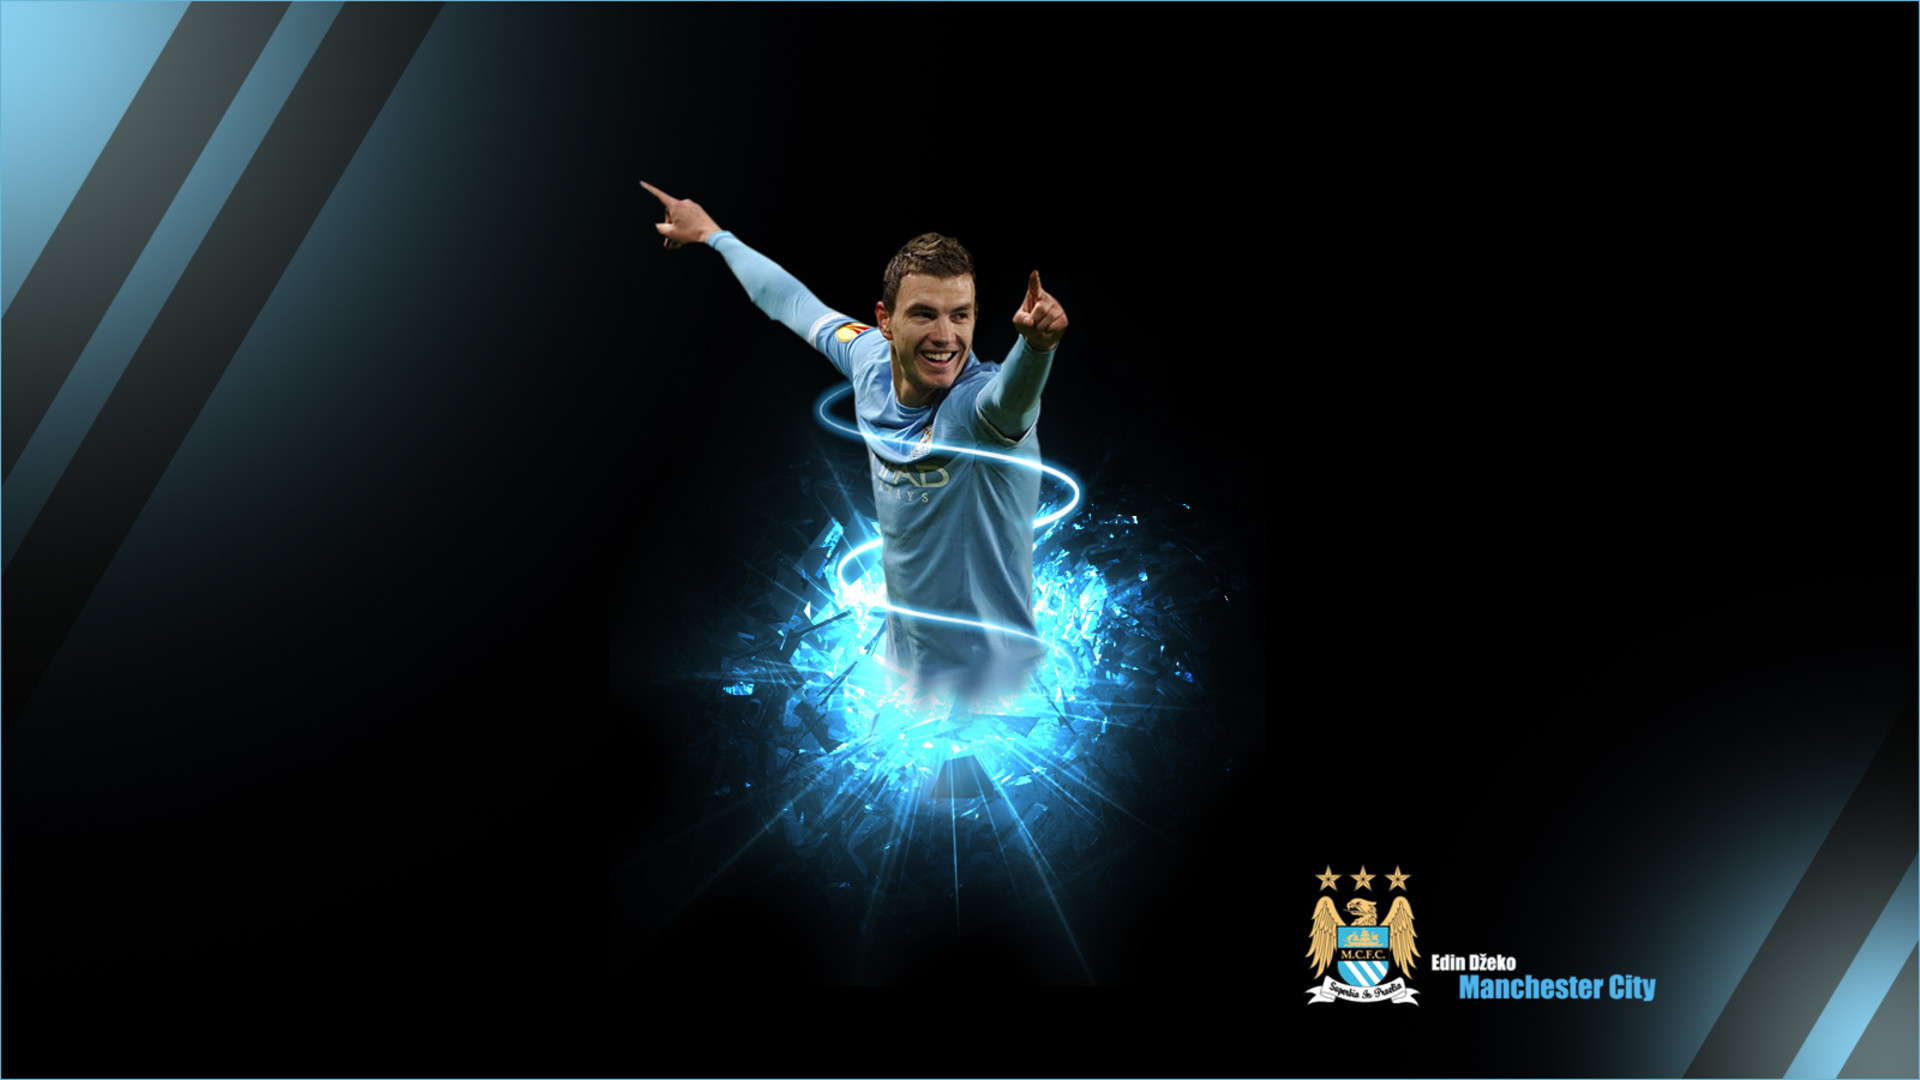 1920x1080 Football Player of Manchester City wallpapers and images - wallpapers,  pictures, photos